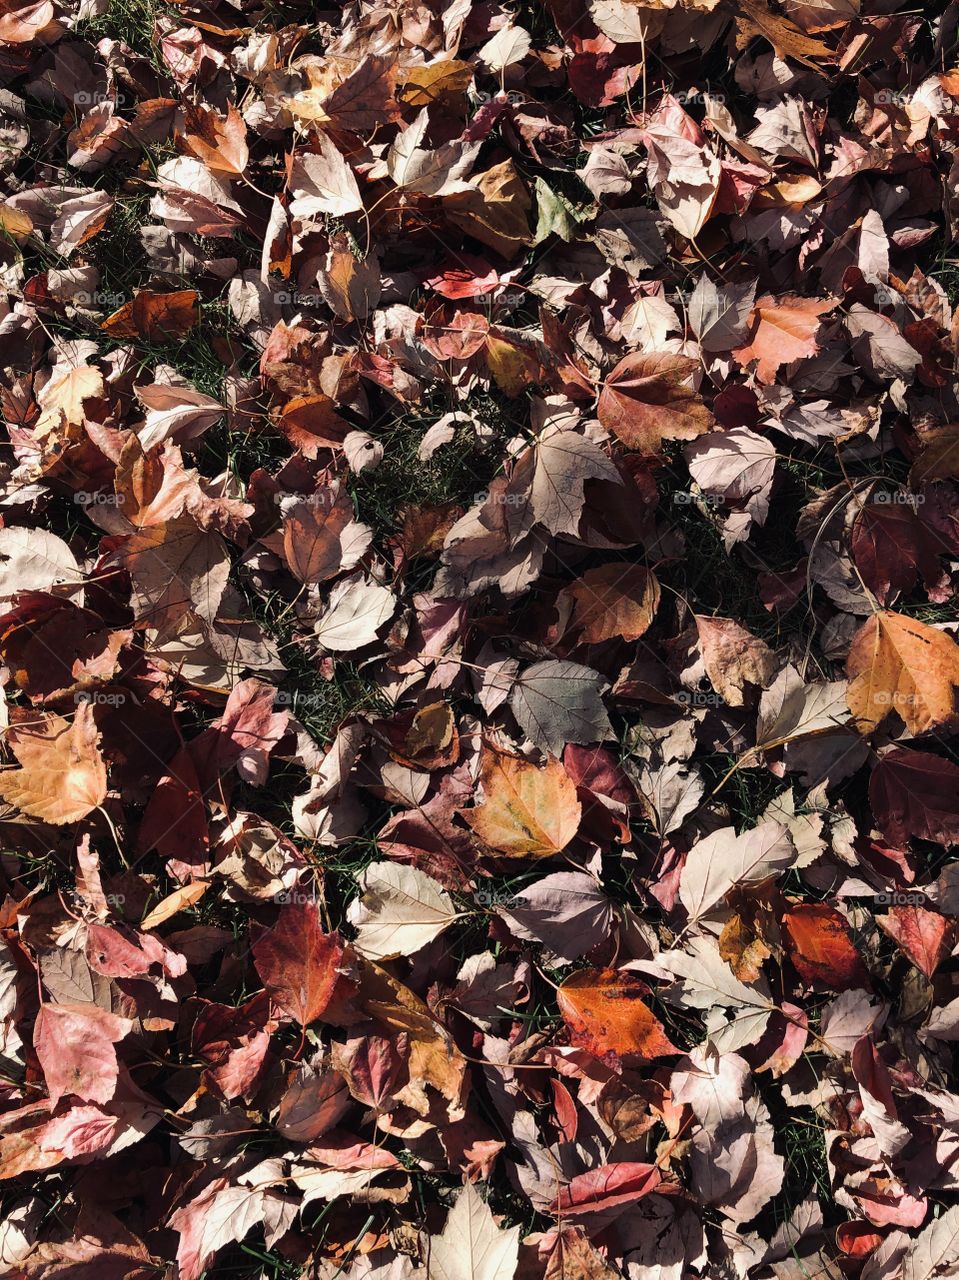 Autumn leaves  on the grass fallen leaves multi colored fall us here 